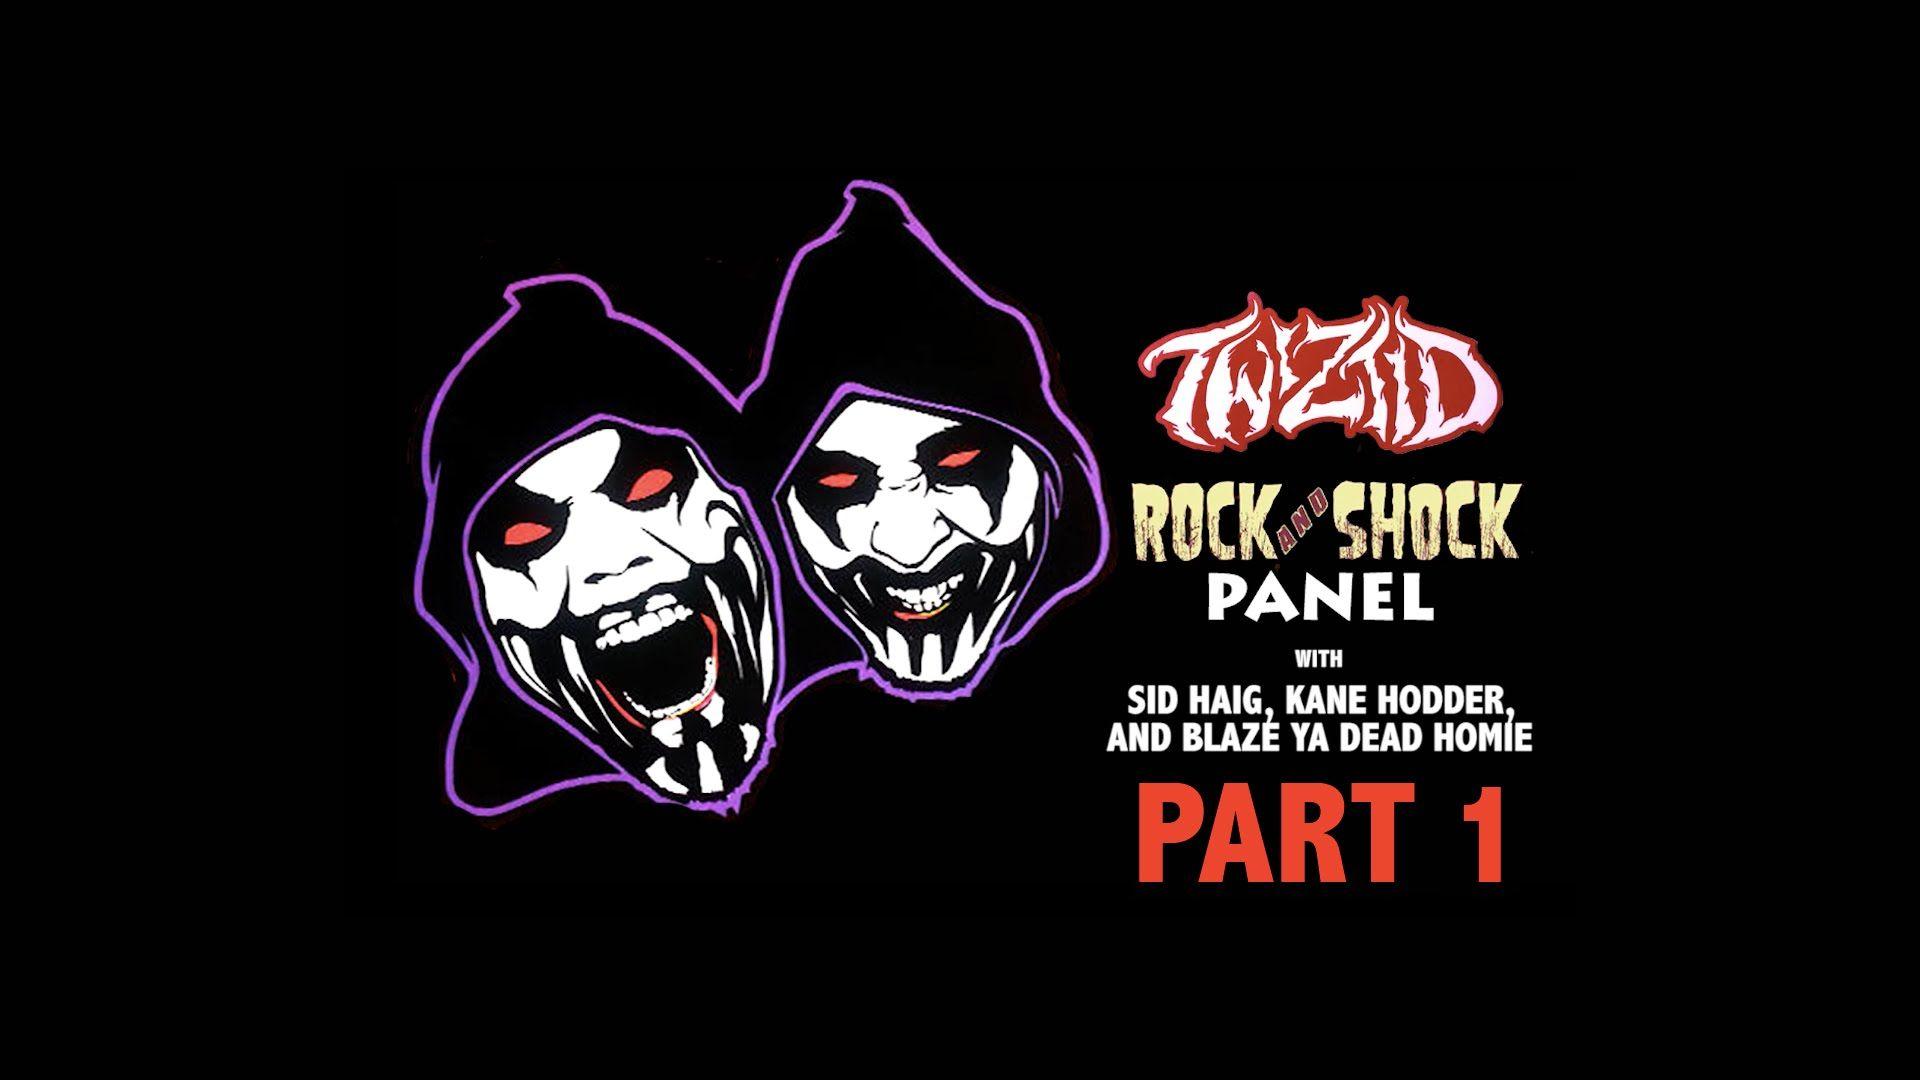 Twiztid Releases Footage From Rock And Shock Panel Featuring Blaze